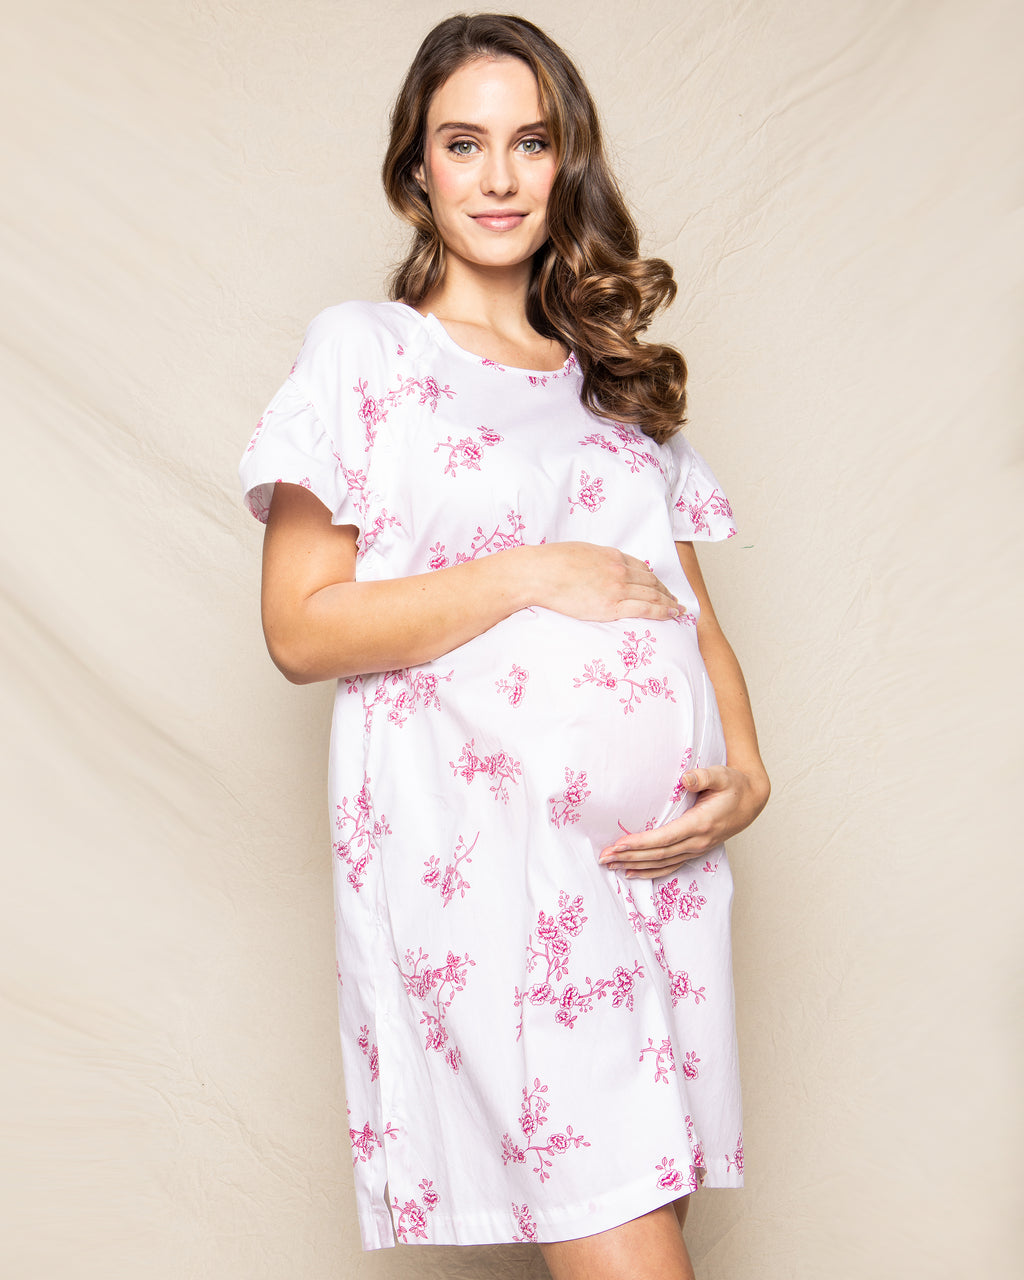 Women's Twill Hospital Gown in English Rose Floral – Petite Plume